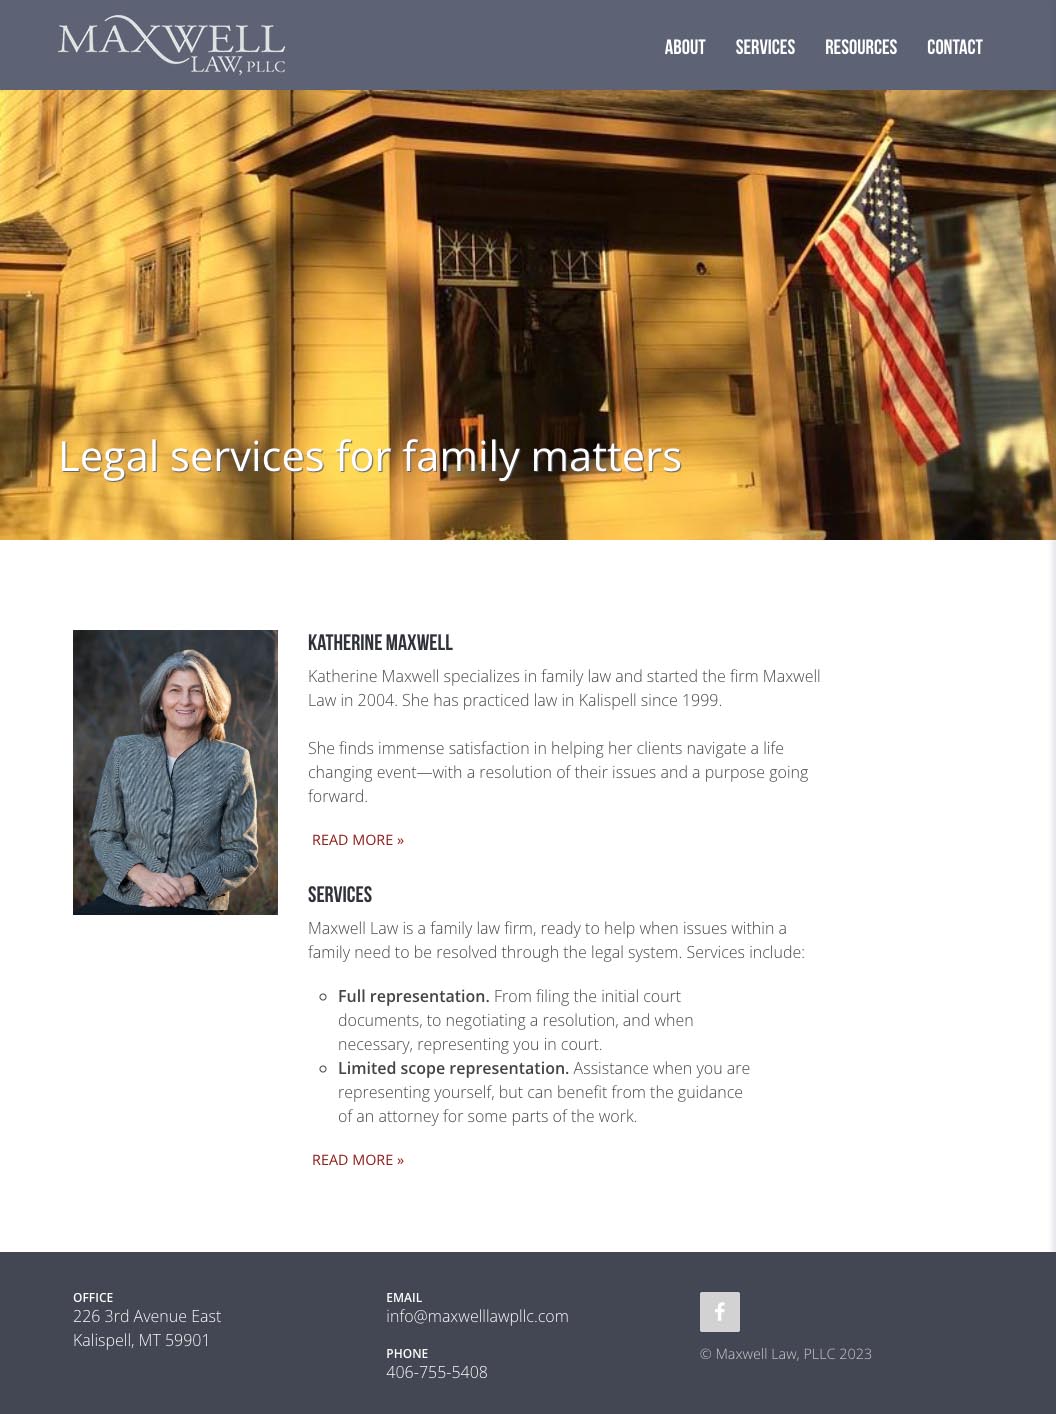 website design for lawyers-consultants-agents - We designed this website for a small family law firm in Montana with the goal of creating a comfortable atmosphere.																																												 - long-scrolling page with rich visual sections to help a user find what they are looking for.